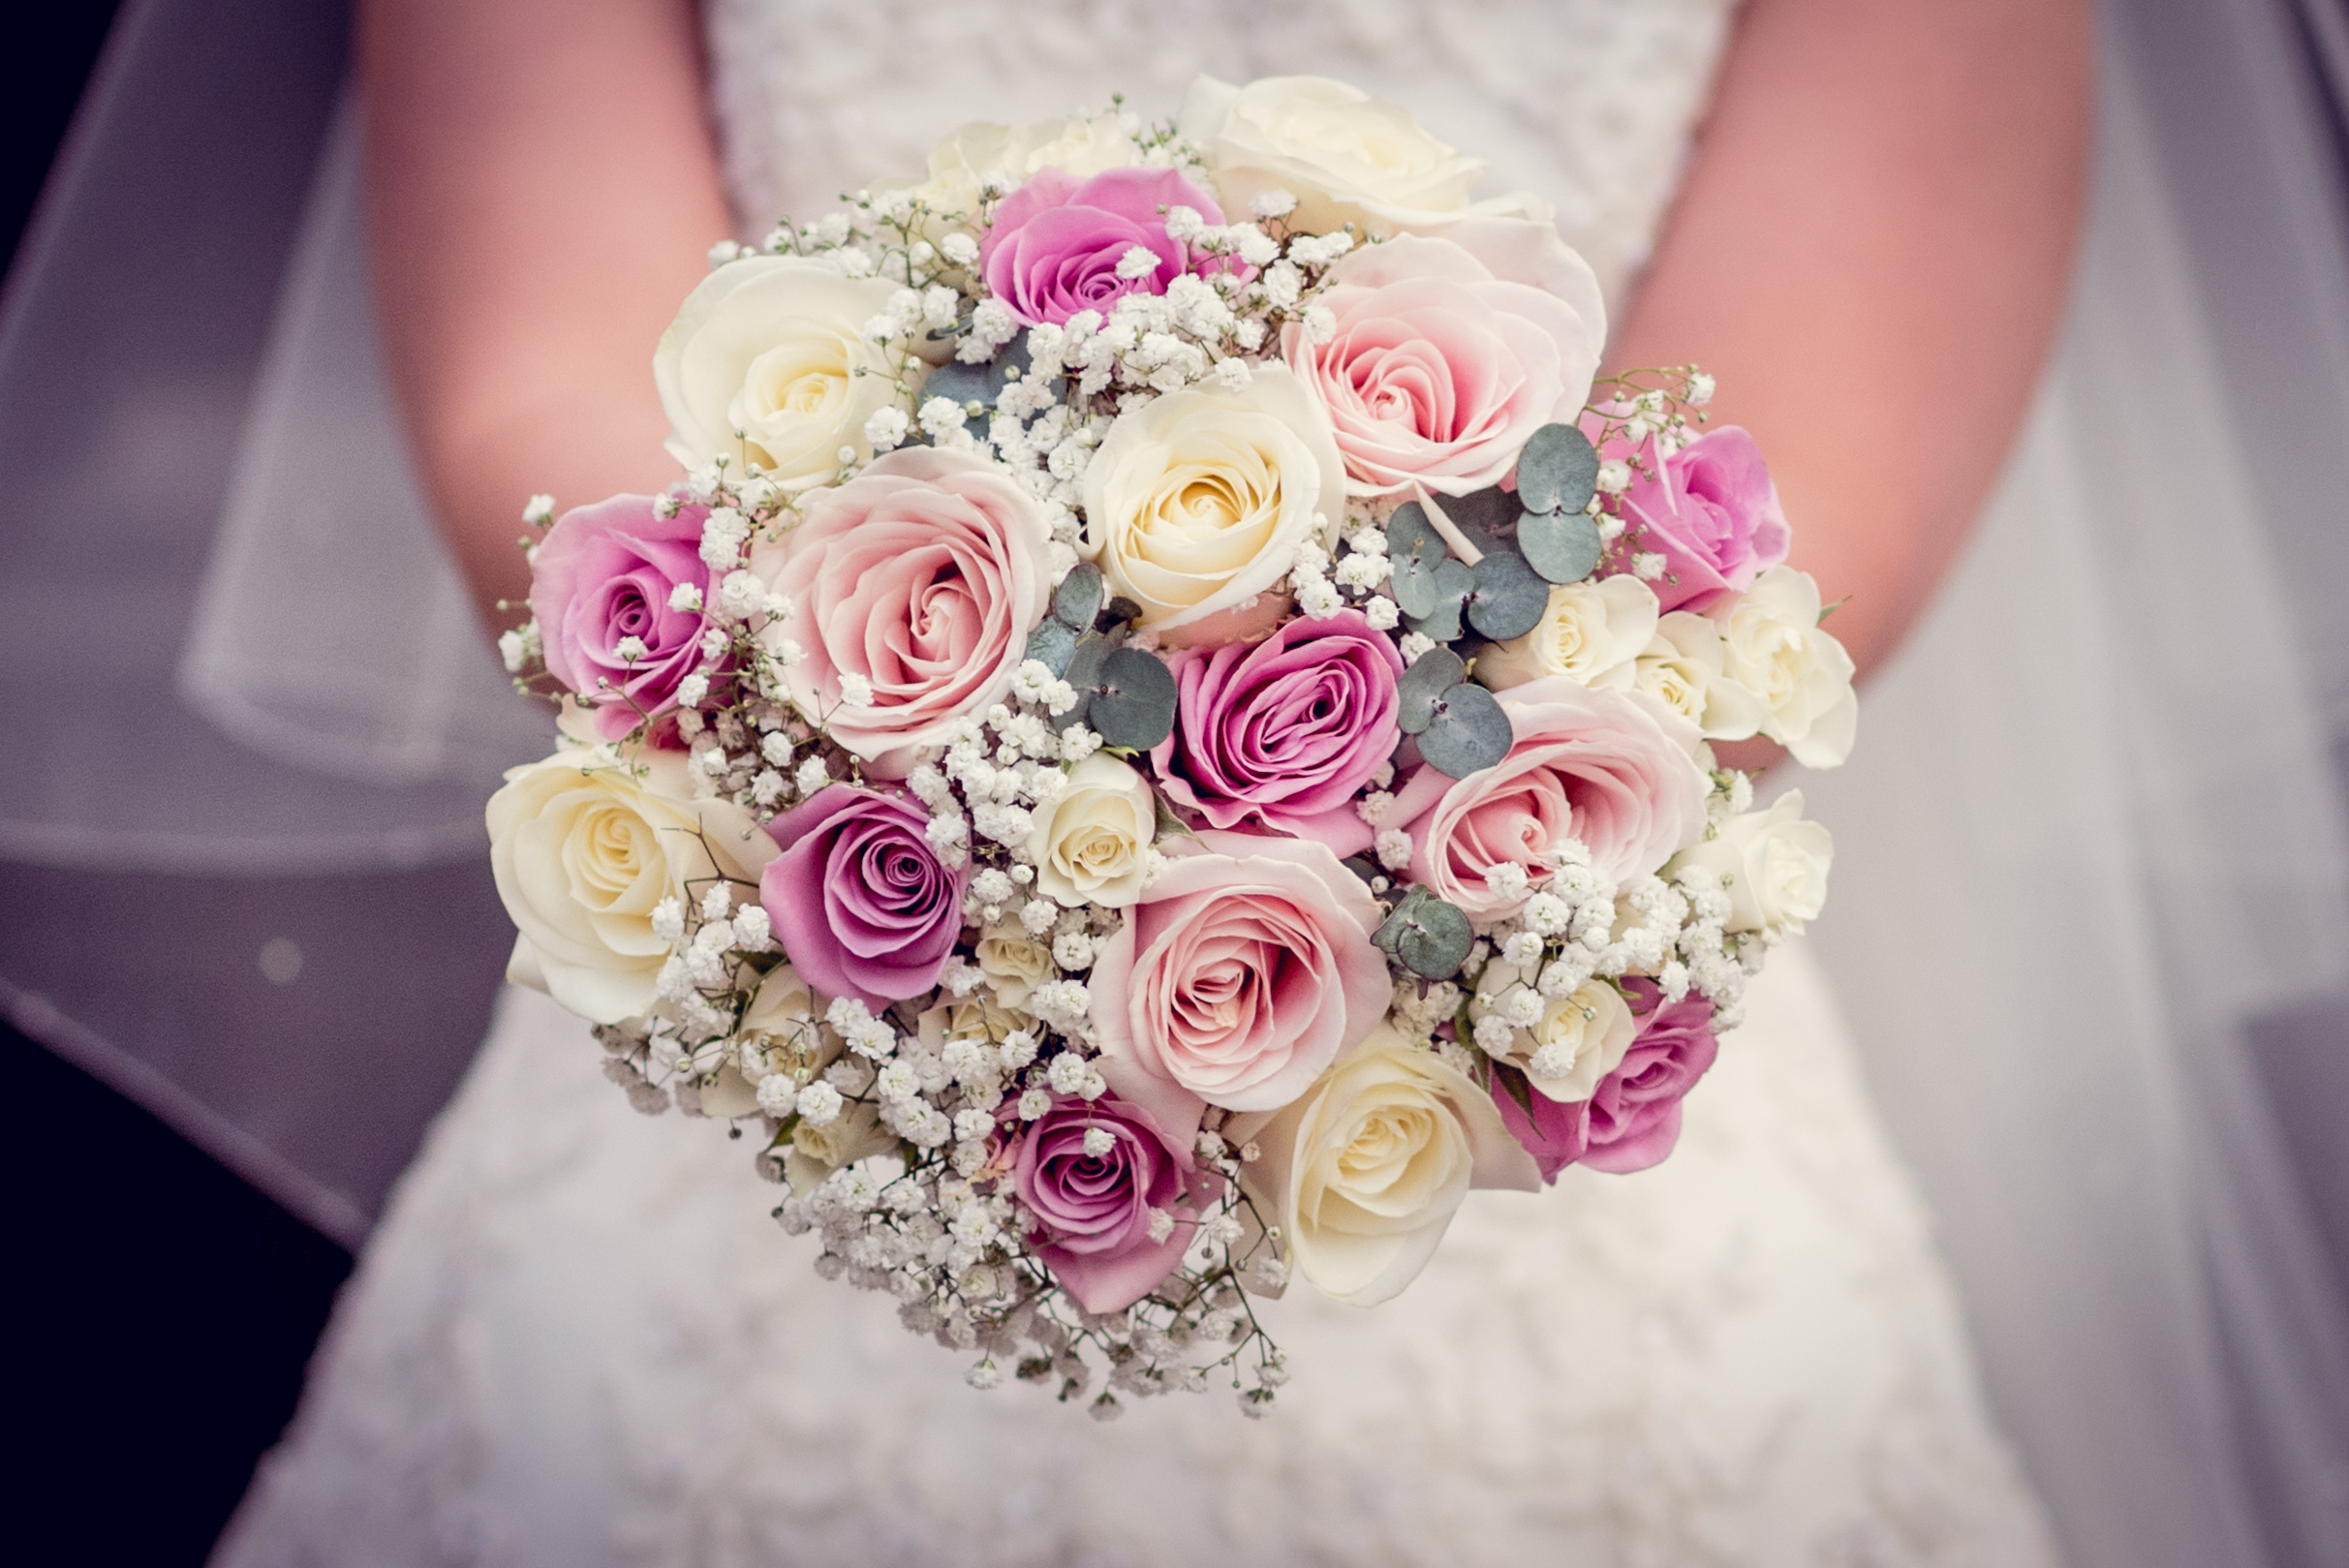 Ivory roses pink roses with gypsophila